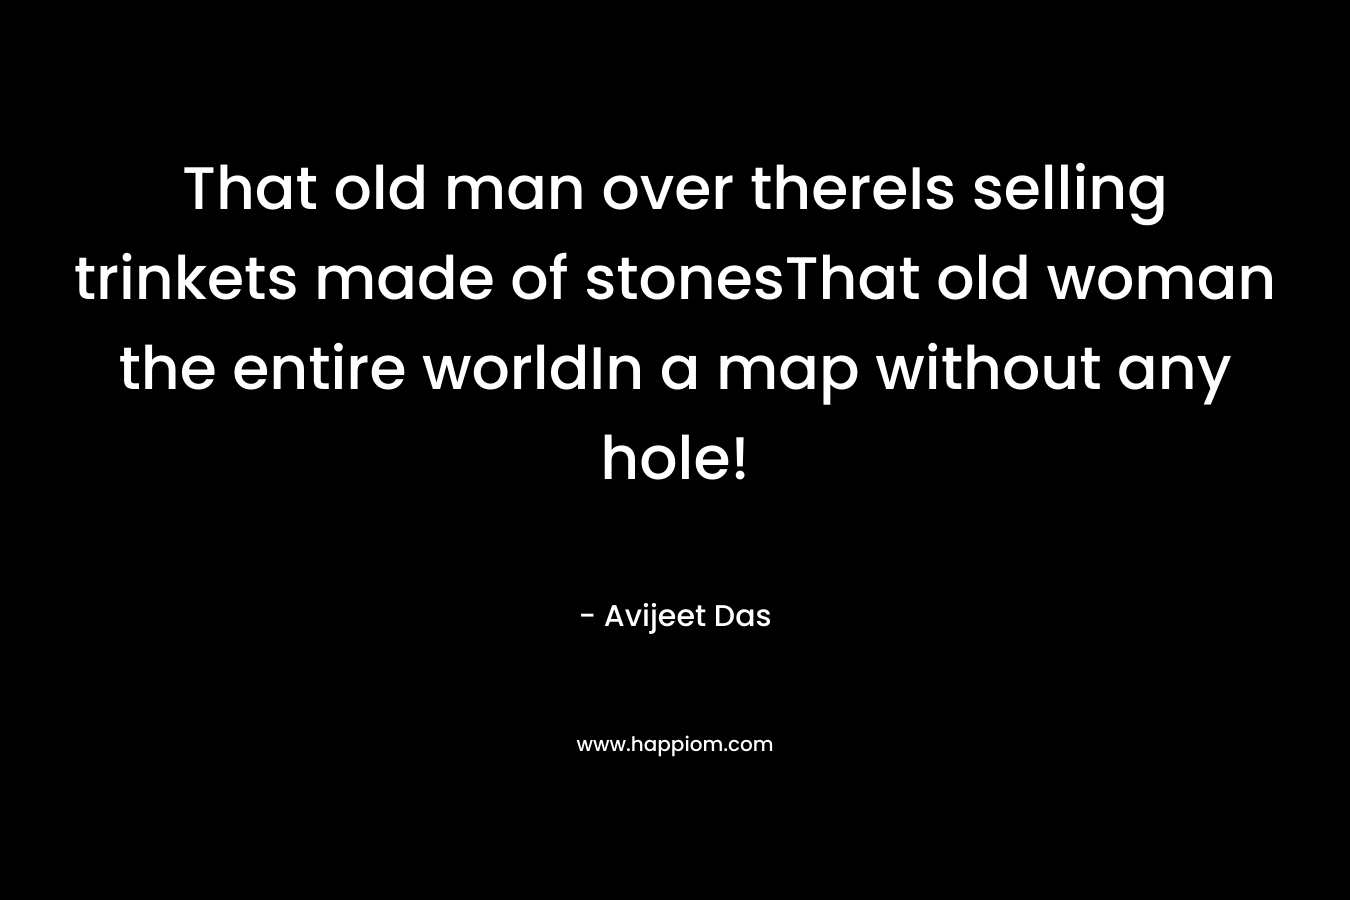 That old man over thereIs selling trinkets made of stonesThat old woman the entire worldIn a map without any hole!